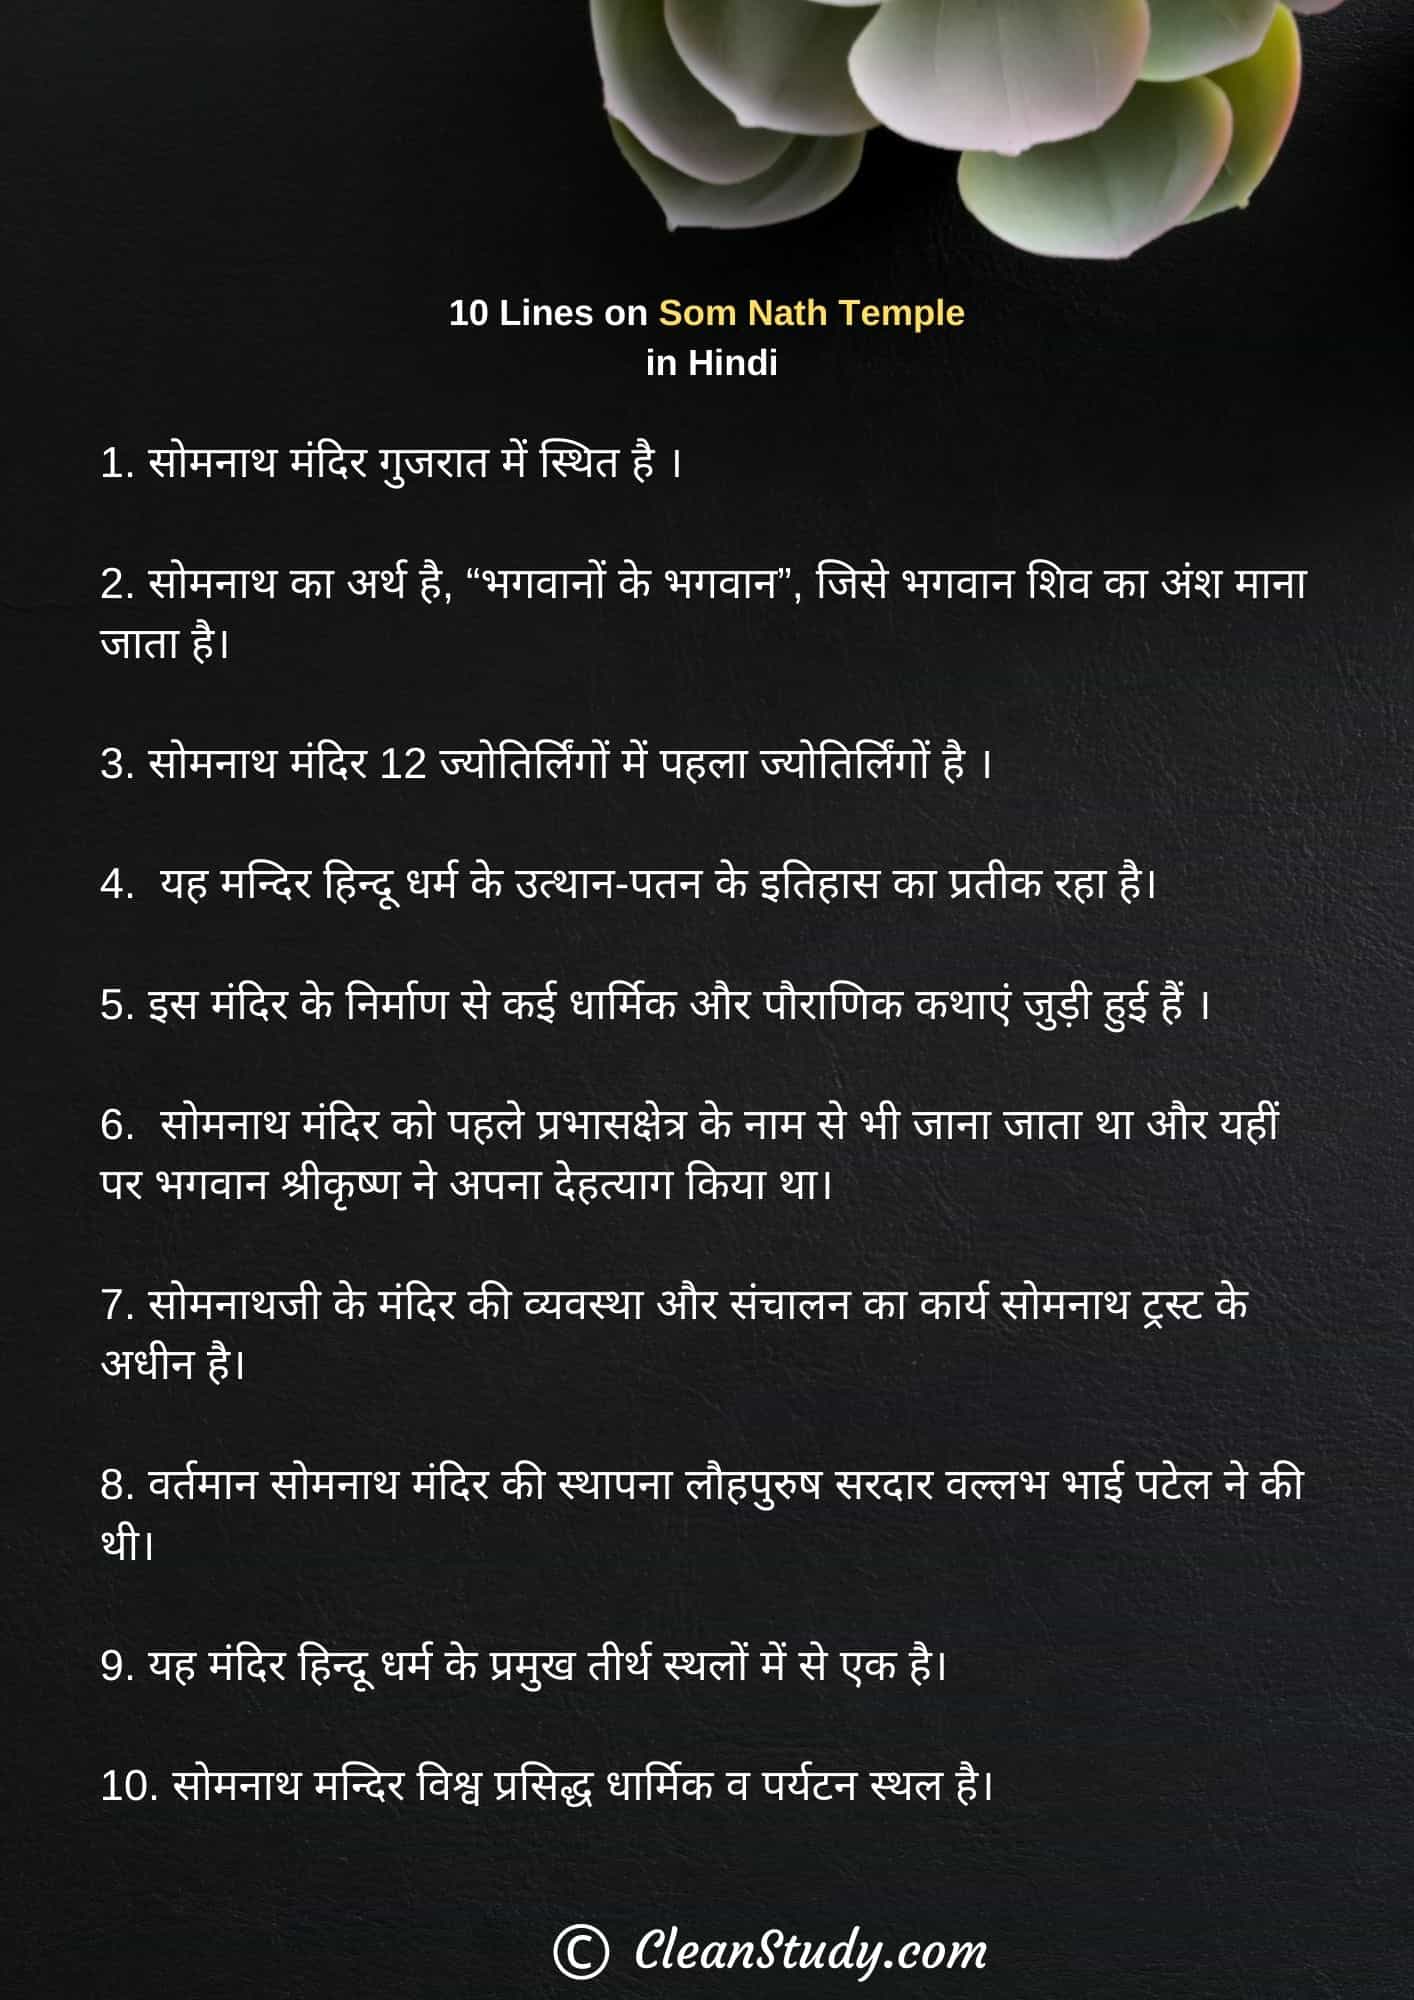 10 lines on Somnath Temple in Hindi